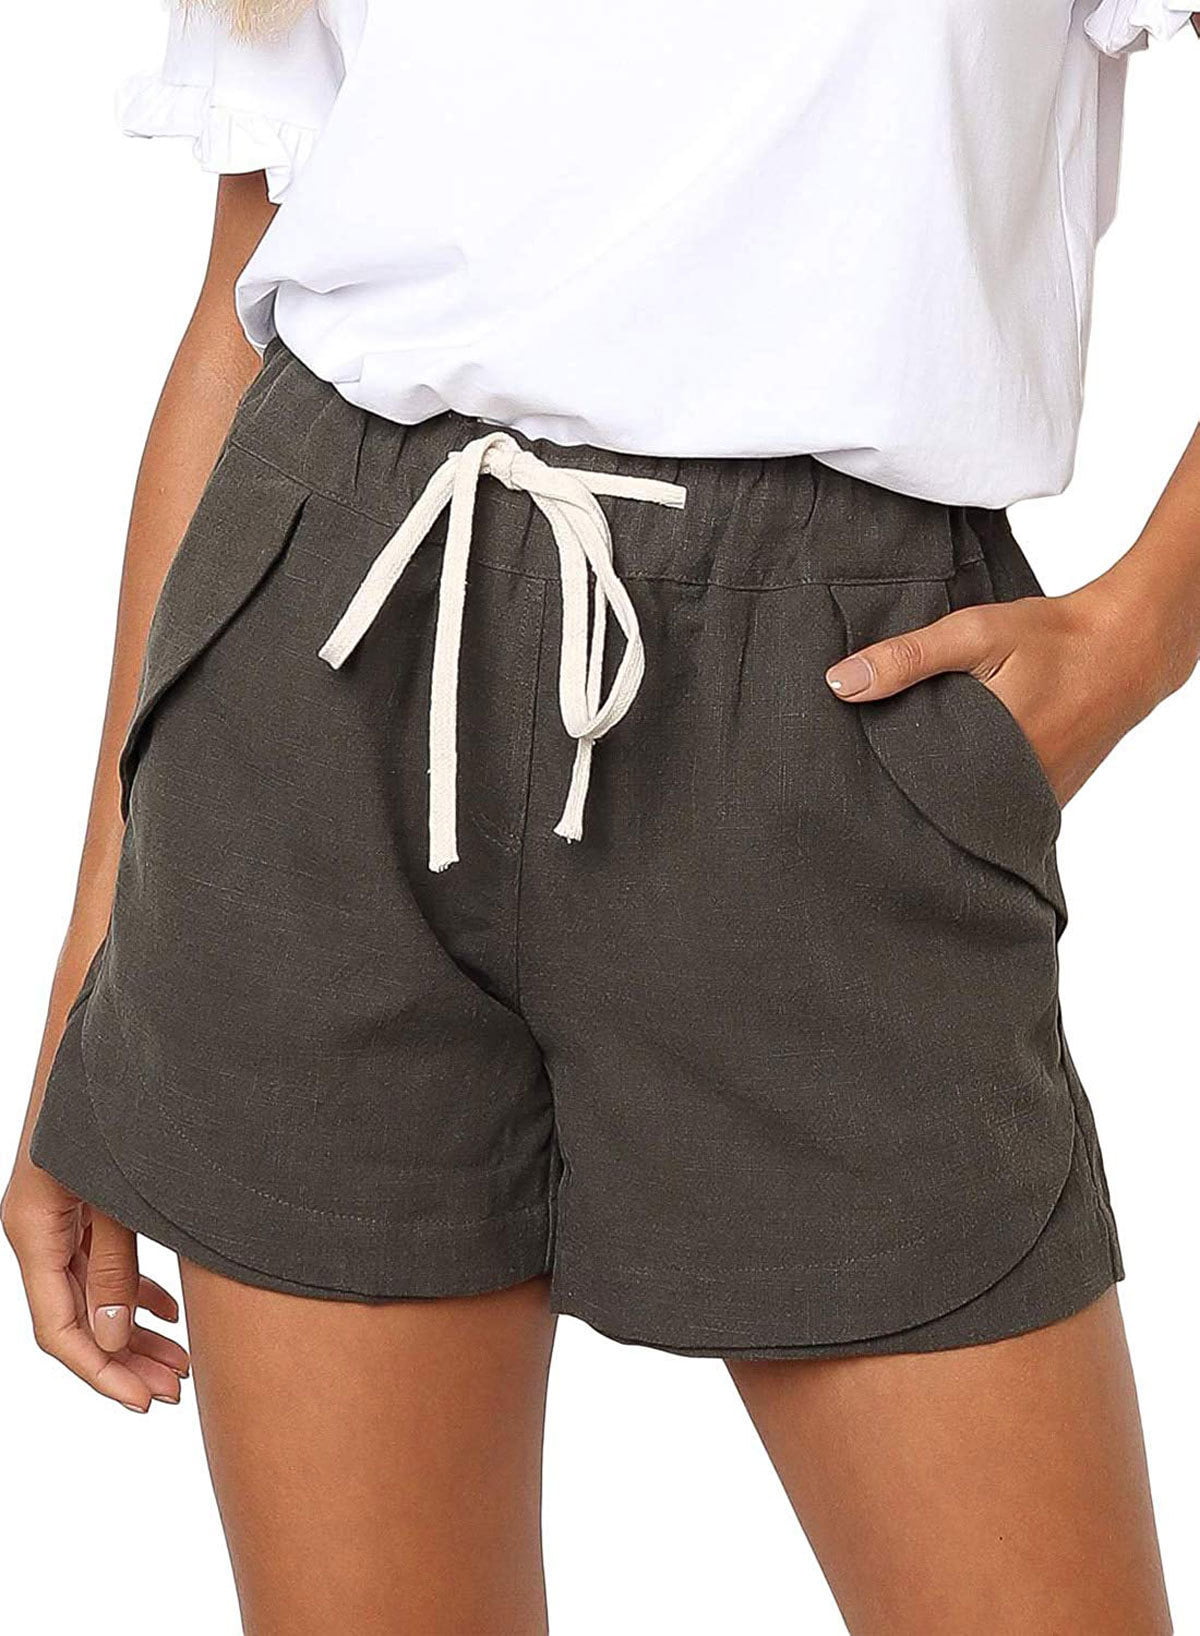 Sweatwater Womens Belt Solid High Waist Summer Breathable Basic Shorts